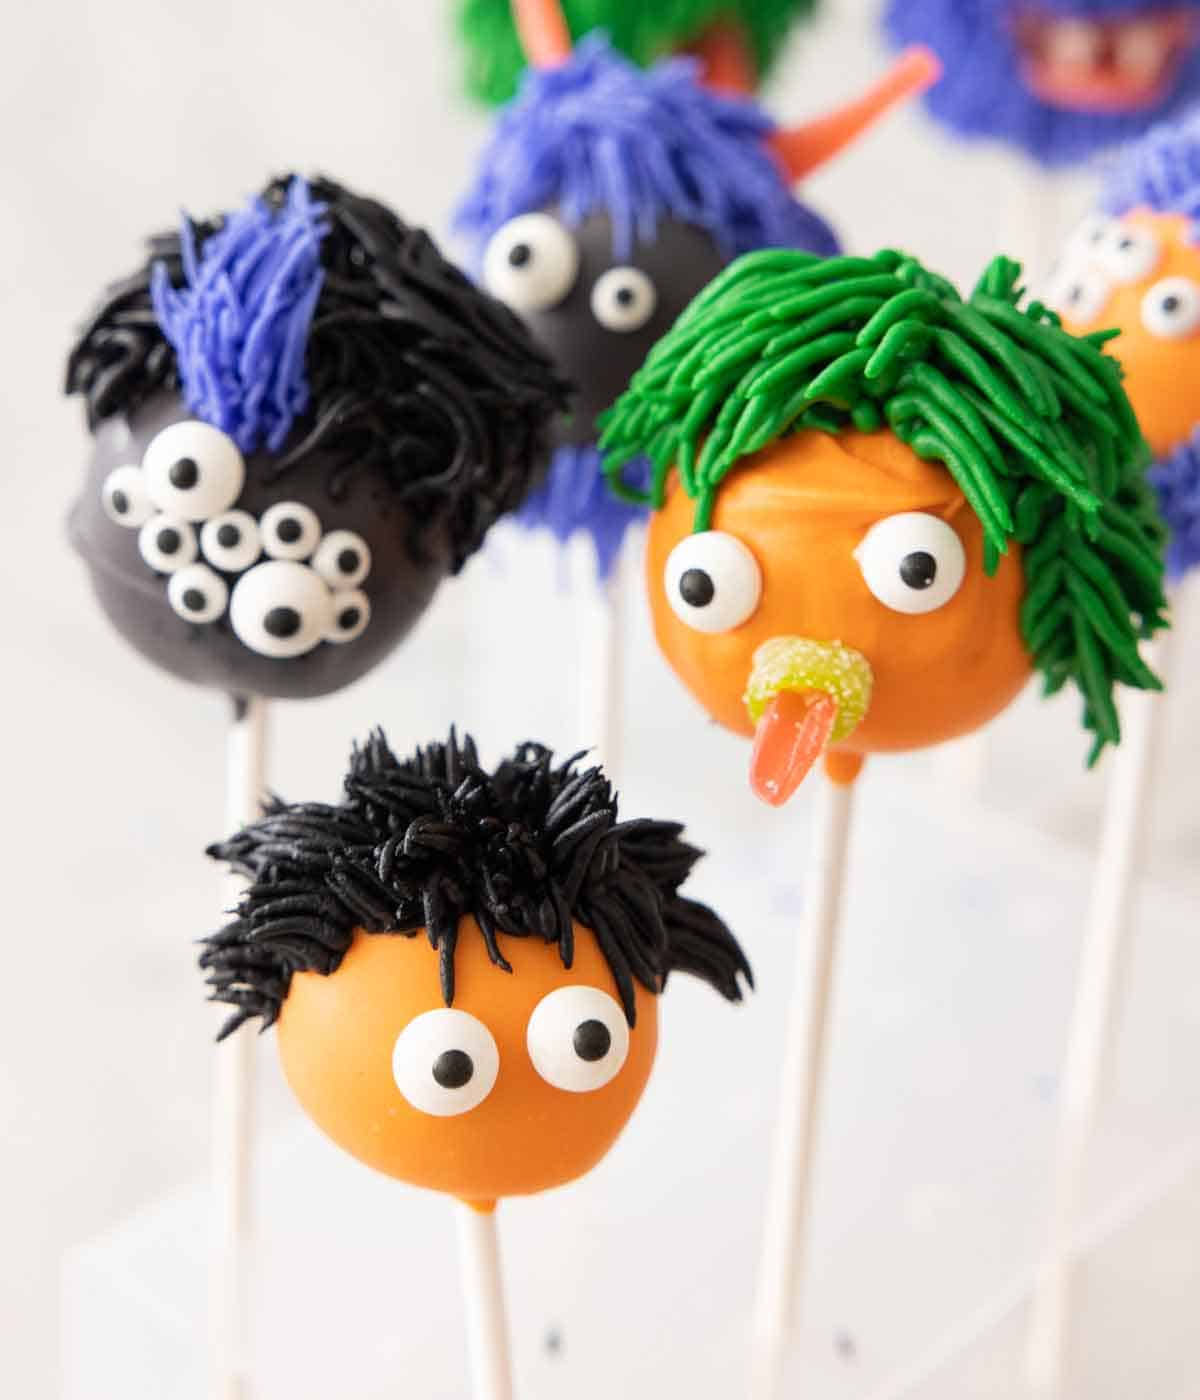 Halloween cake pops decorated as monsters with eyes and hair.